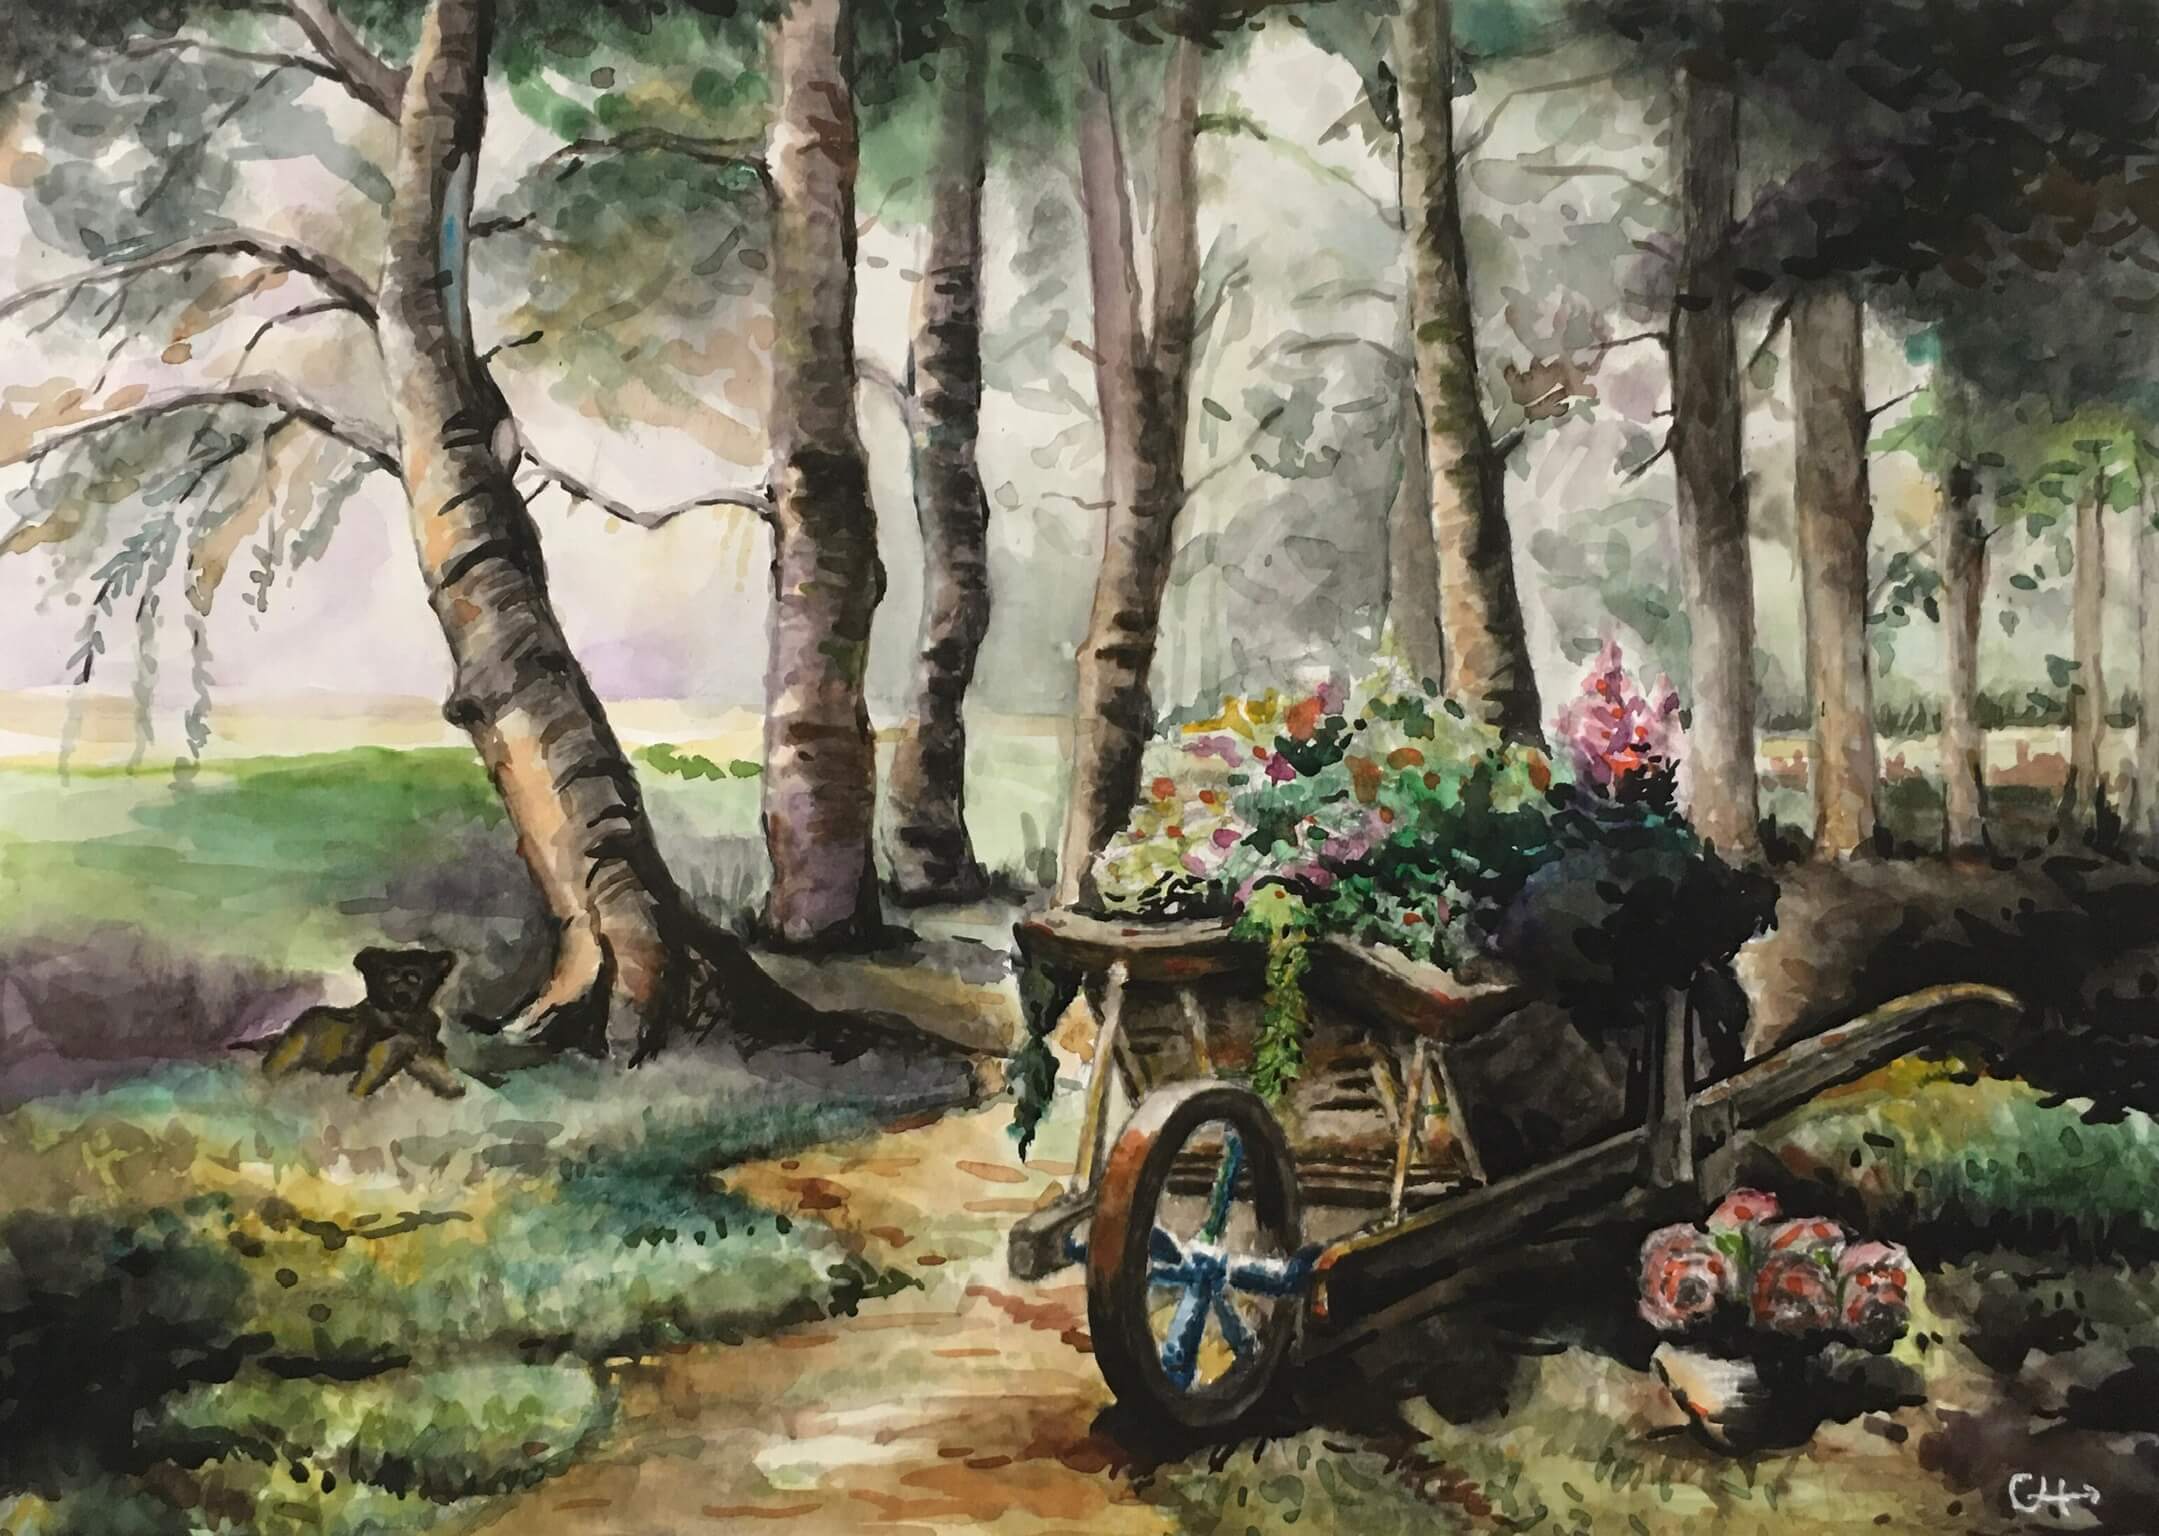 A painting by Luke Chih-hsuan of a path leading through the woods.